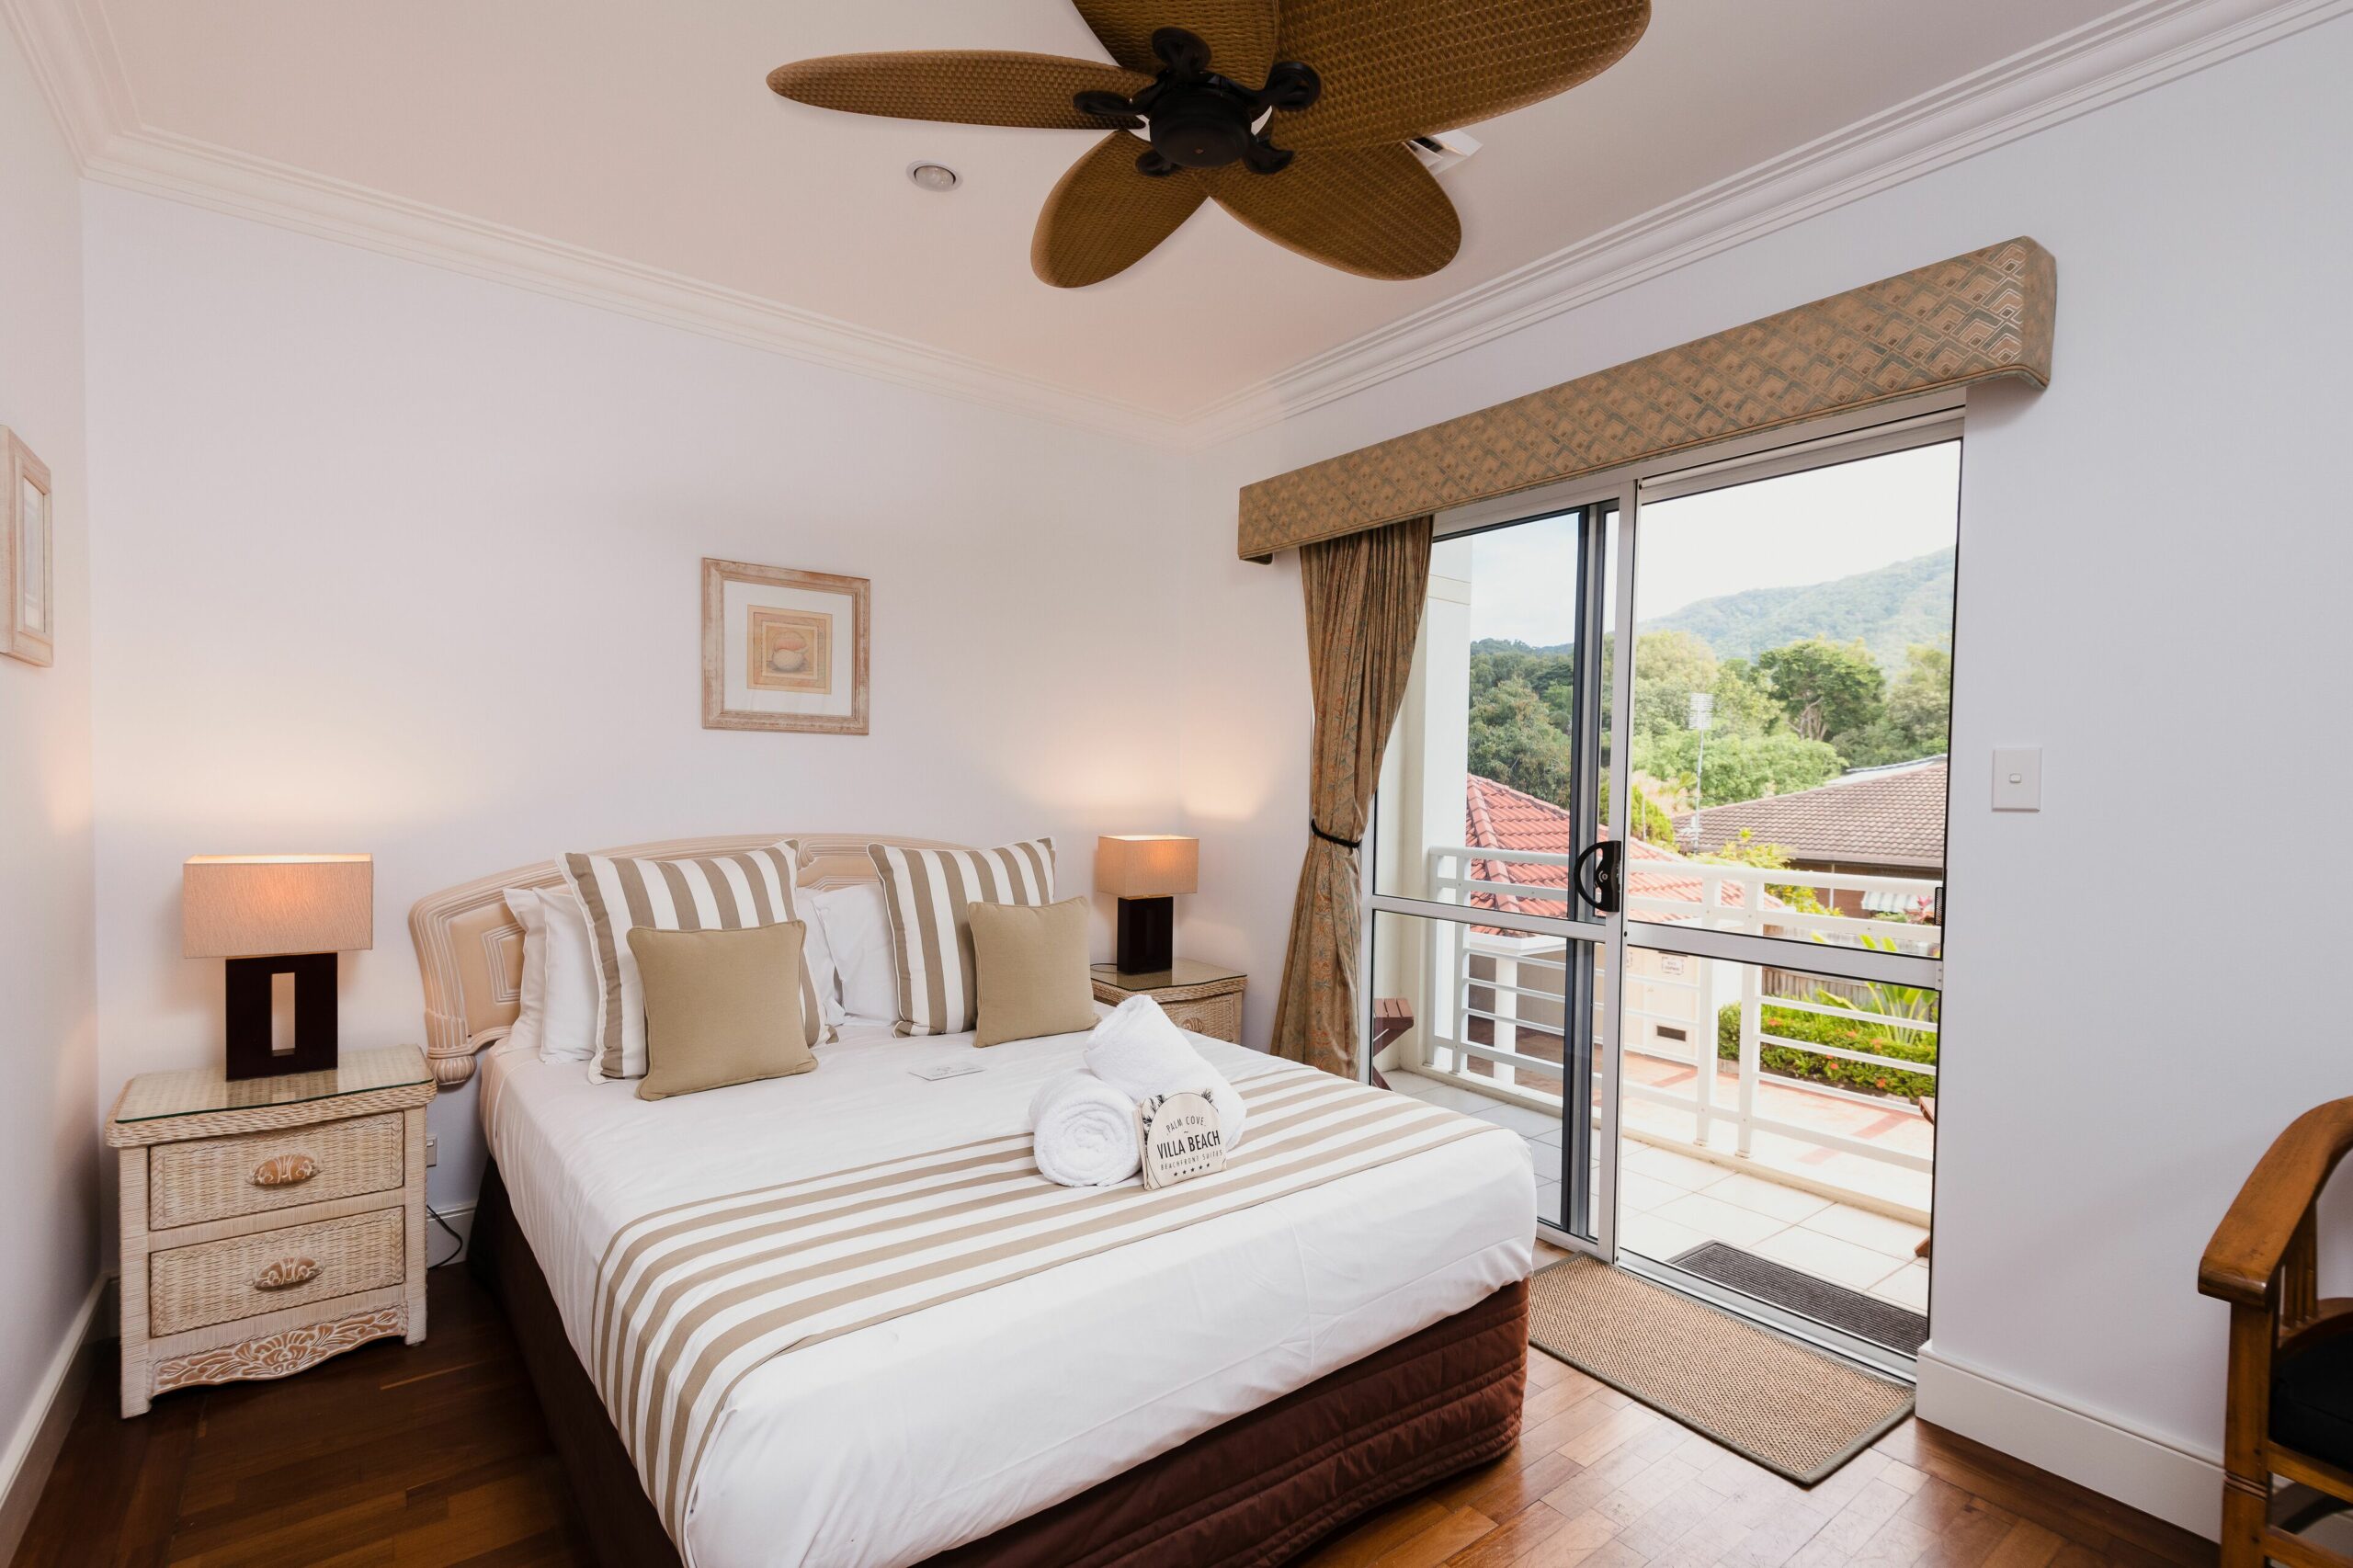 Luxury suite offering beachfront views of the sea from your own private balcony